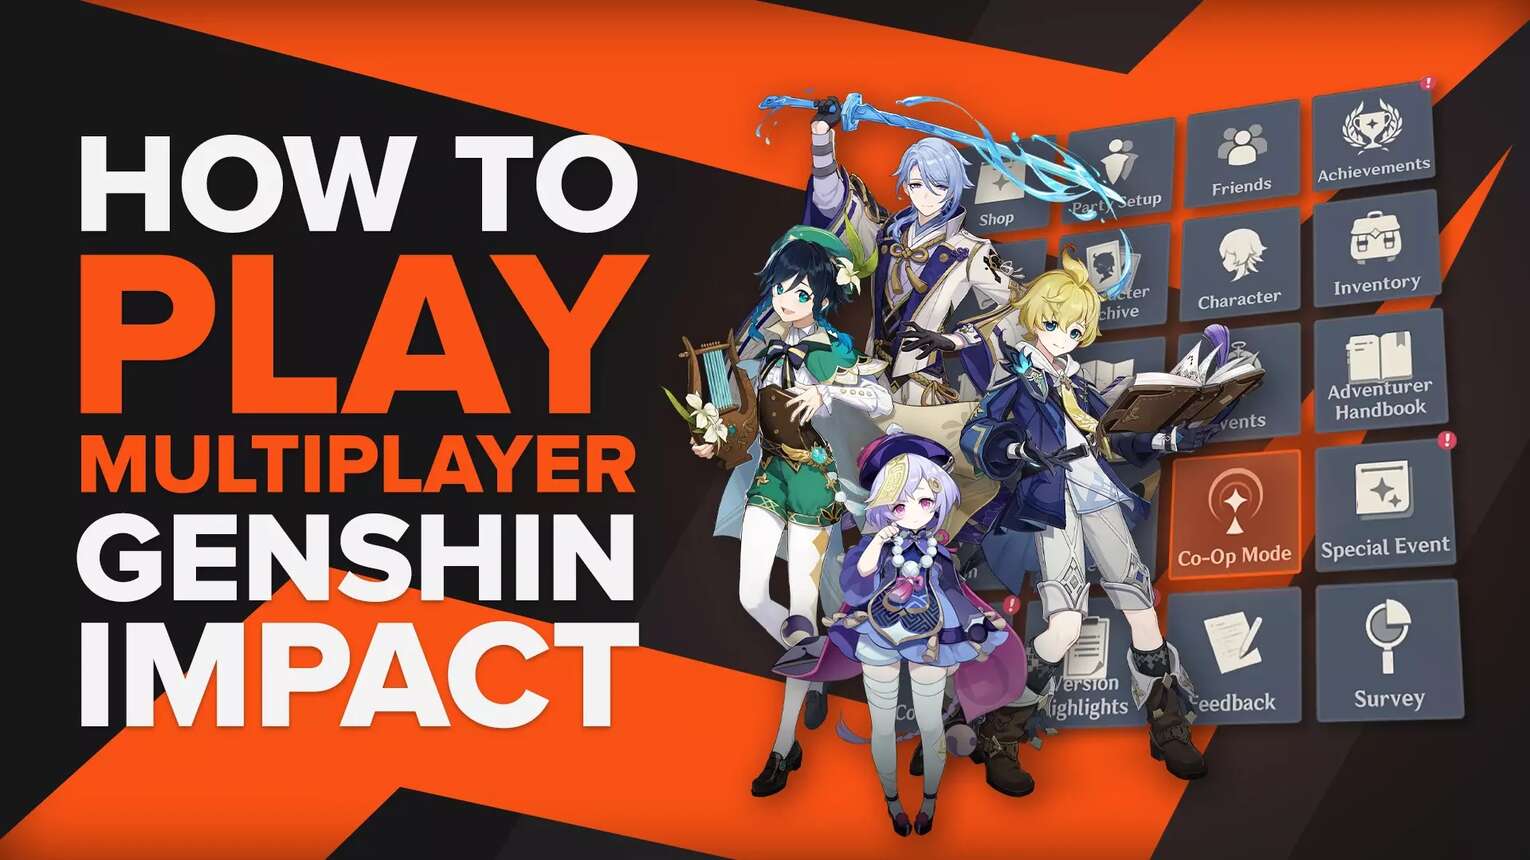 How To Play Multiplayer in Genshin Impact With Friends